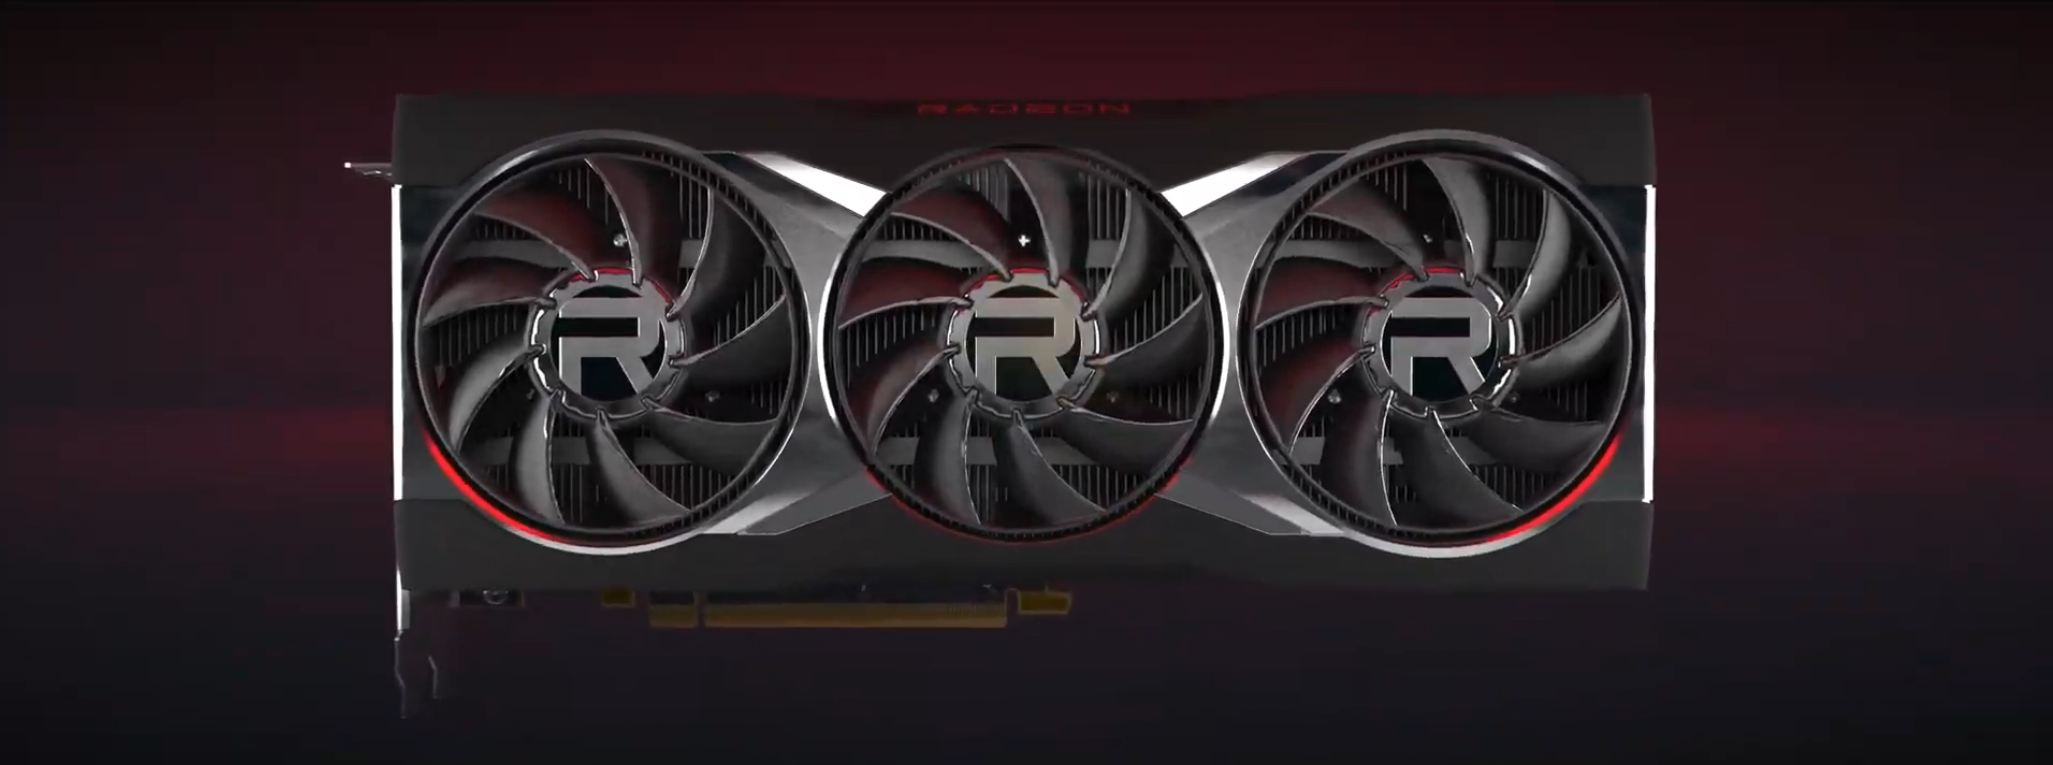 AMD Launches Radeon RX 6900 XT for $999, RX 6800 XT for $649, and RX 6800 for $579; Goes Head To Head With RTX 30 Counterparts